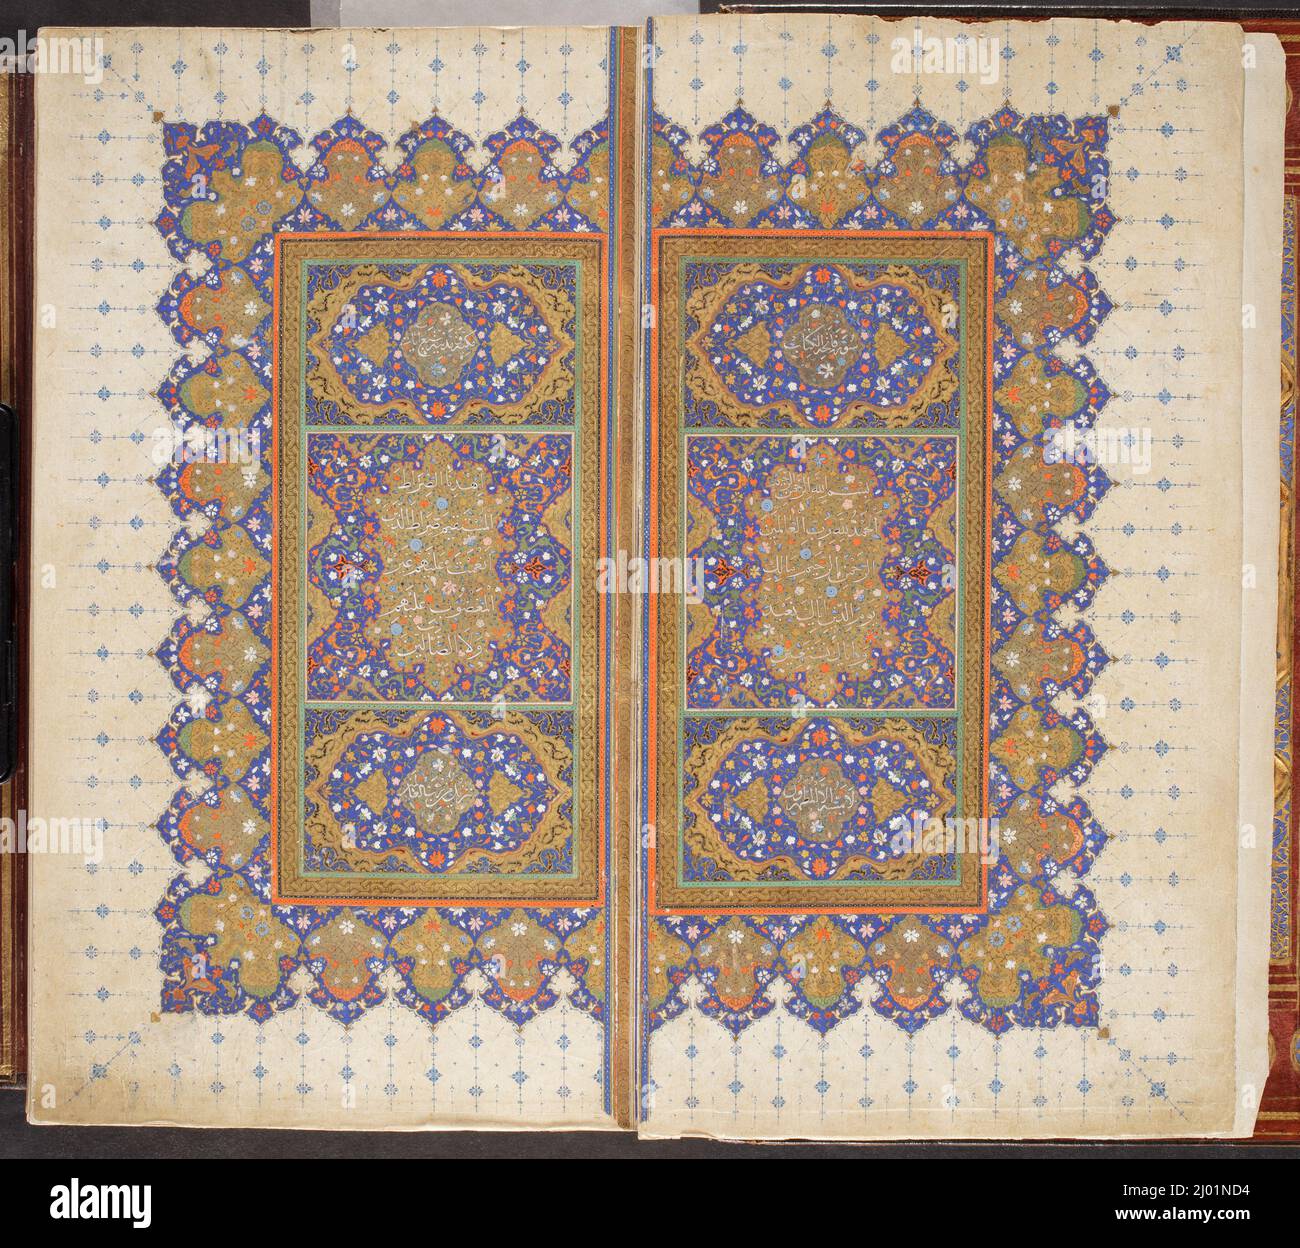 Manuscript of the Qur'an. Iran (Shiraz), 16th century. Manuscripts; codices. Ink, gold and colors on paper Stock Photo